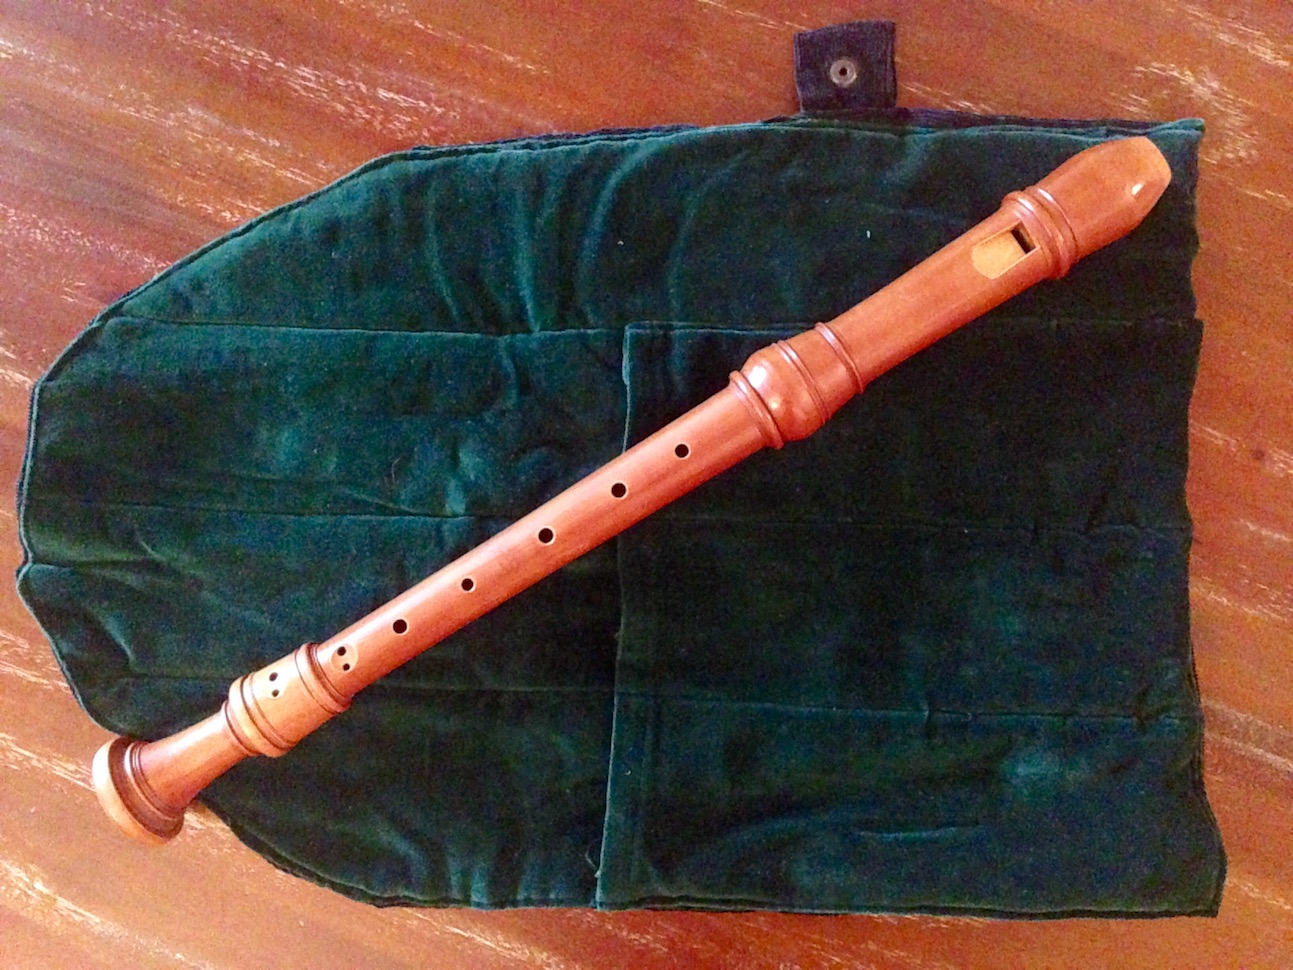 Bressan-alto-recorder-by-Grinter-recorders-for-sale-com-00 \u2014 Recorders for sale